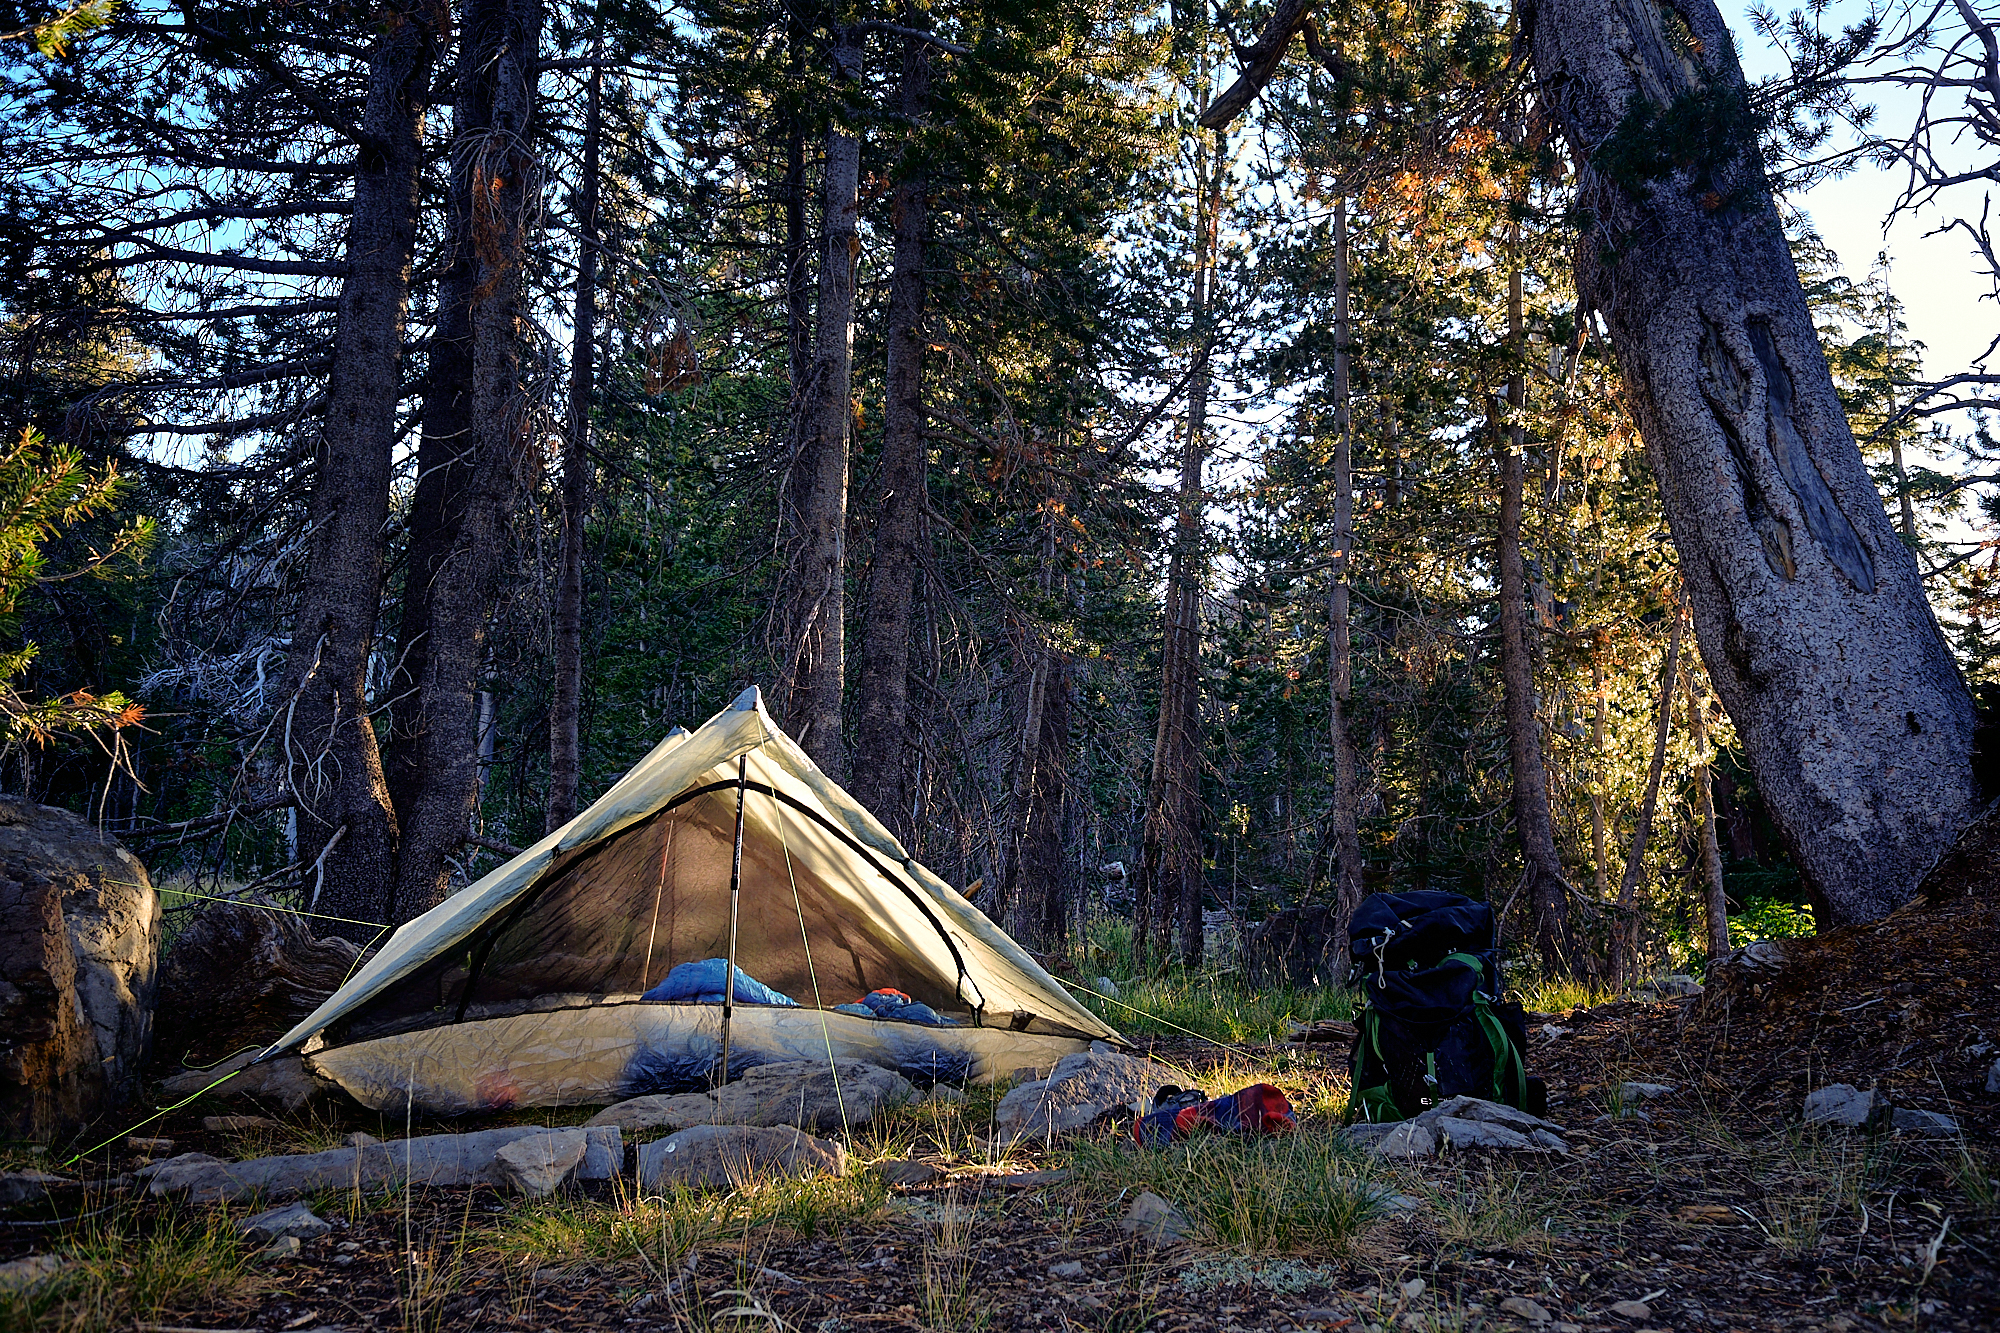  Camp for the night on the Tahoe Rim Trail. | Lake Tahoe, CA 9/7/18 